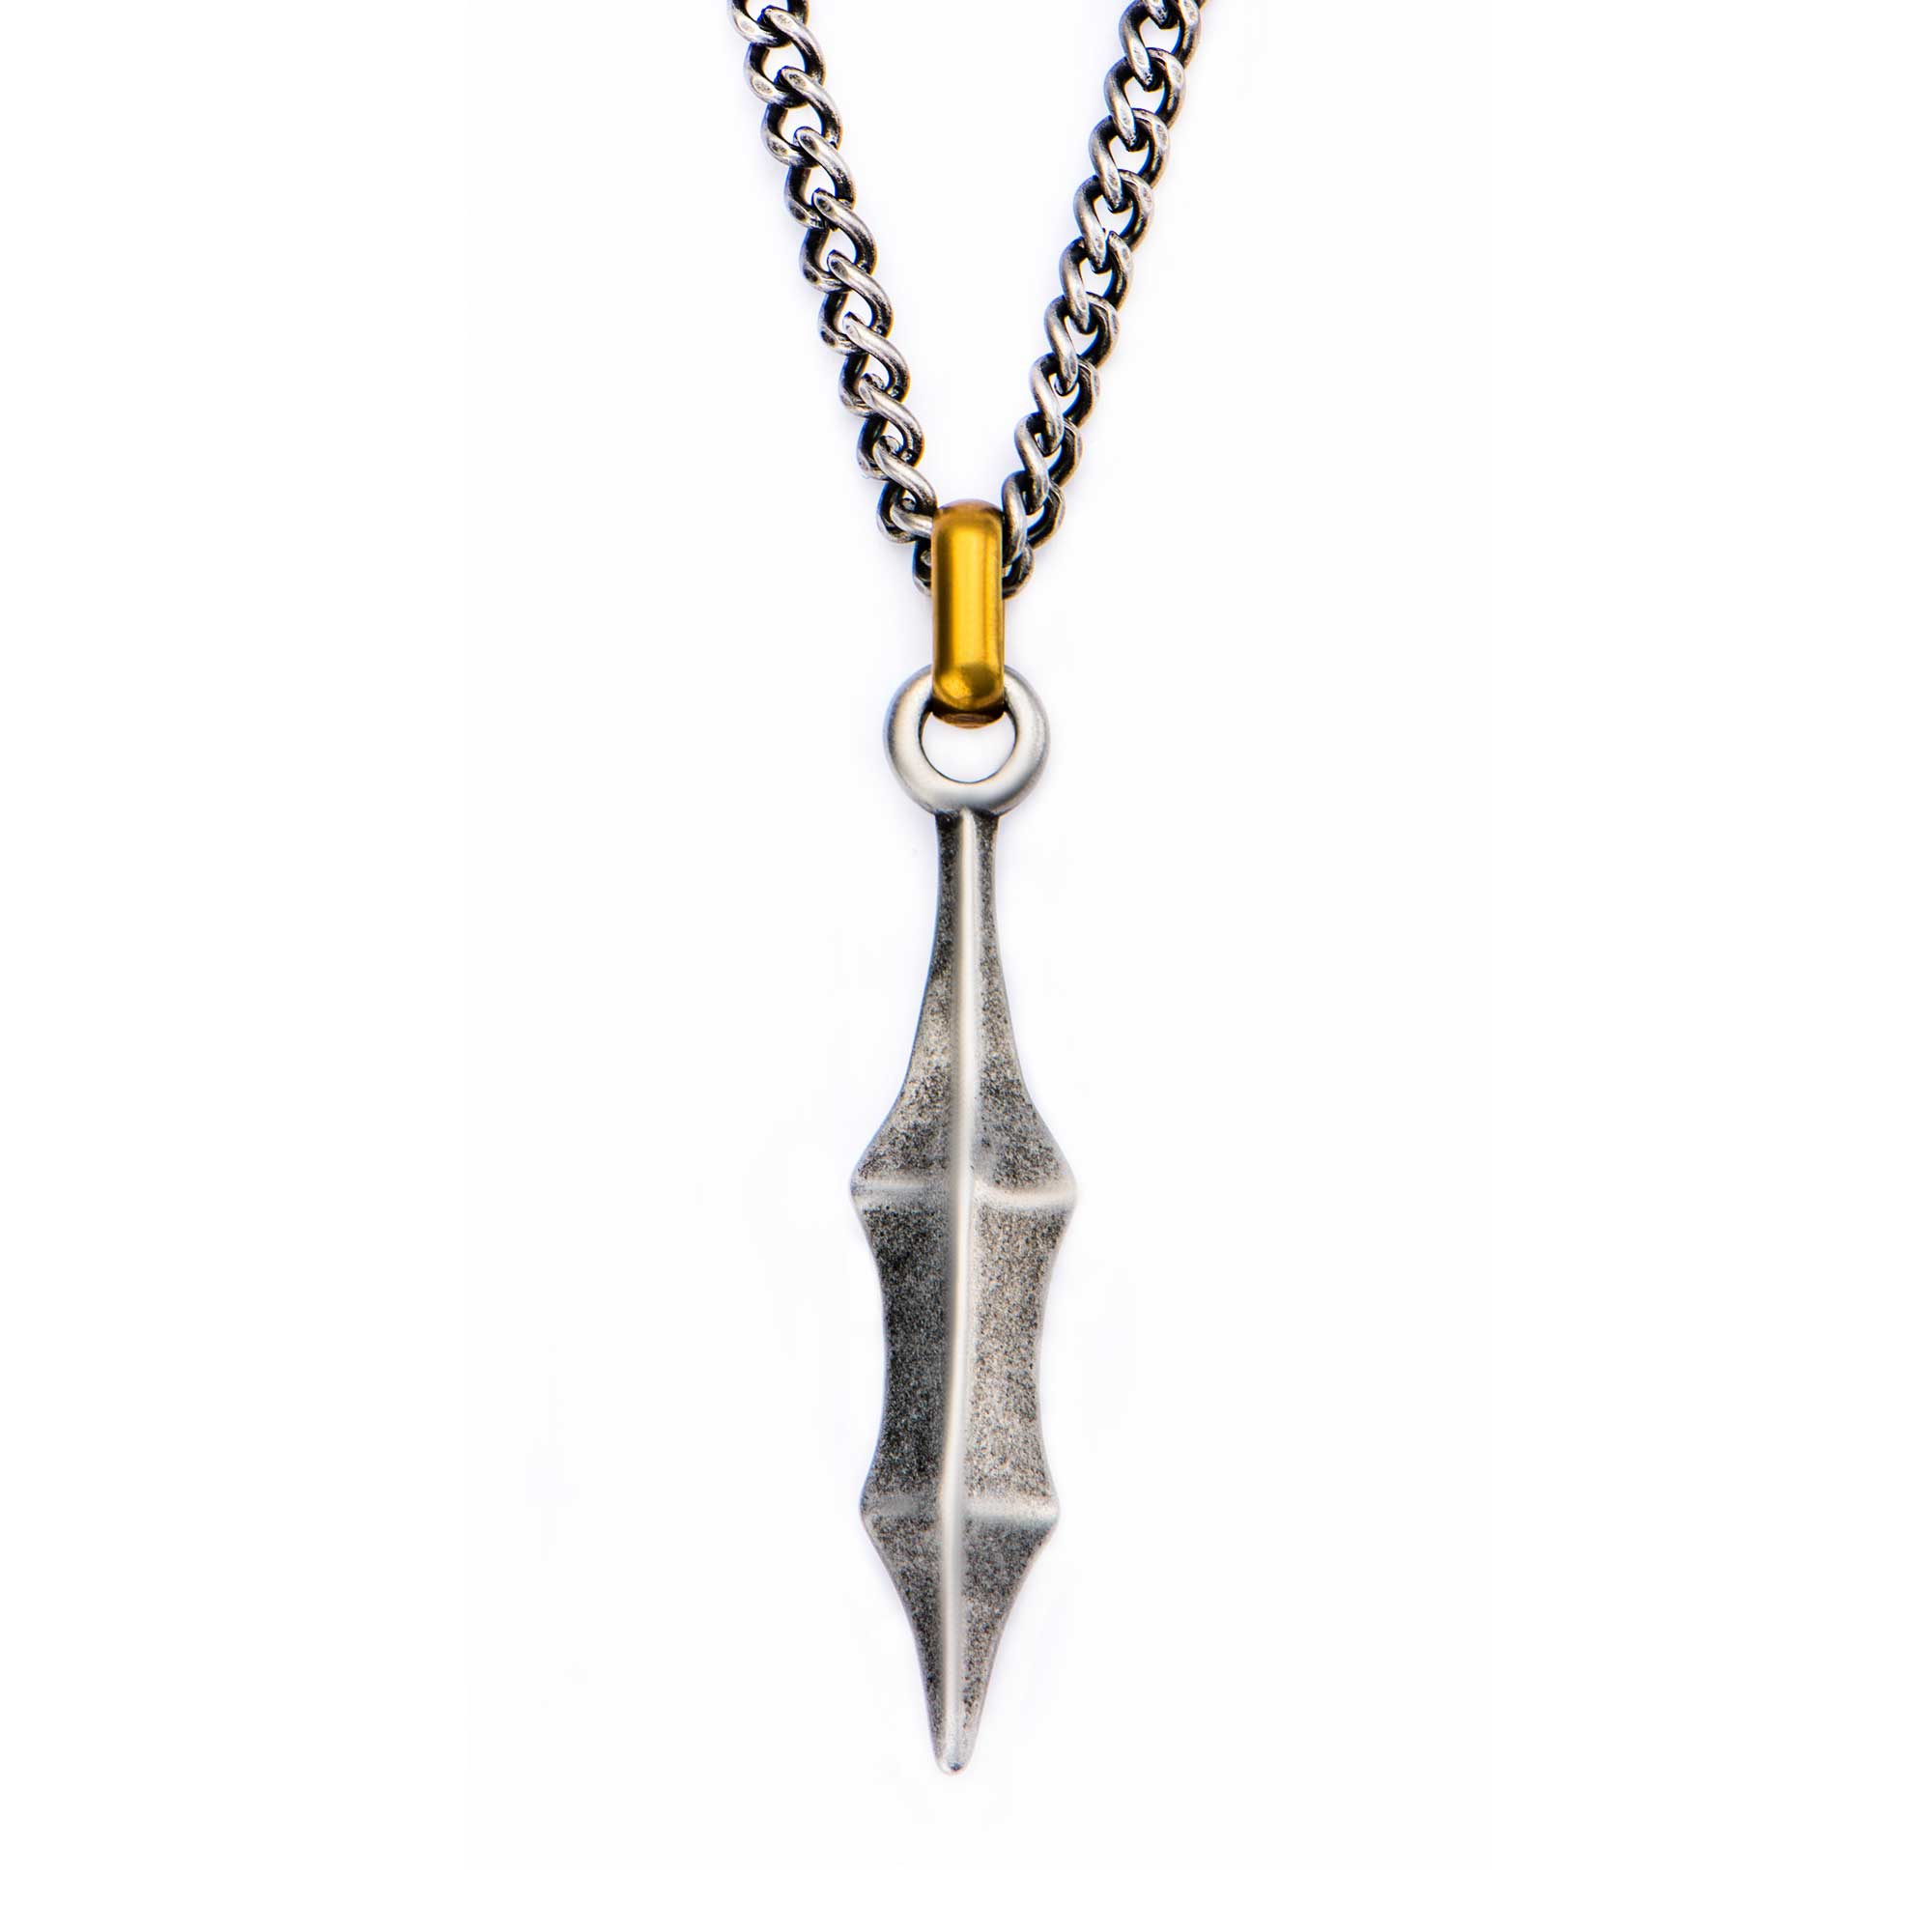 Antique Finish with an Antiqued Gold Plated Bail Medieval Blade Pendant K. Martin Jeweler Dodge City, KS